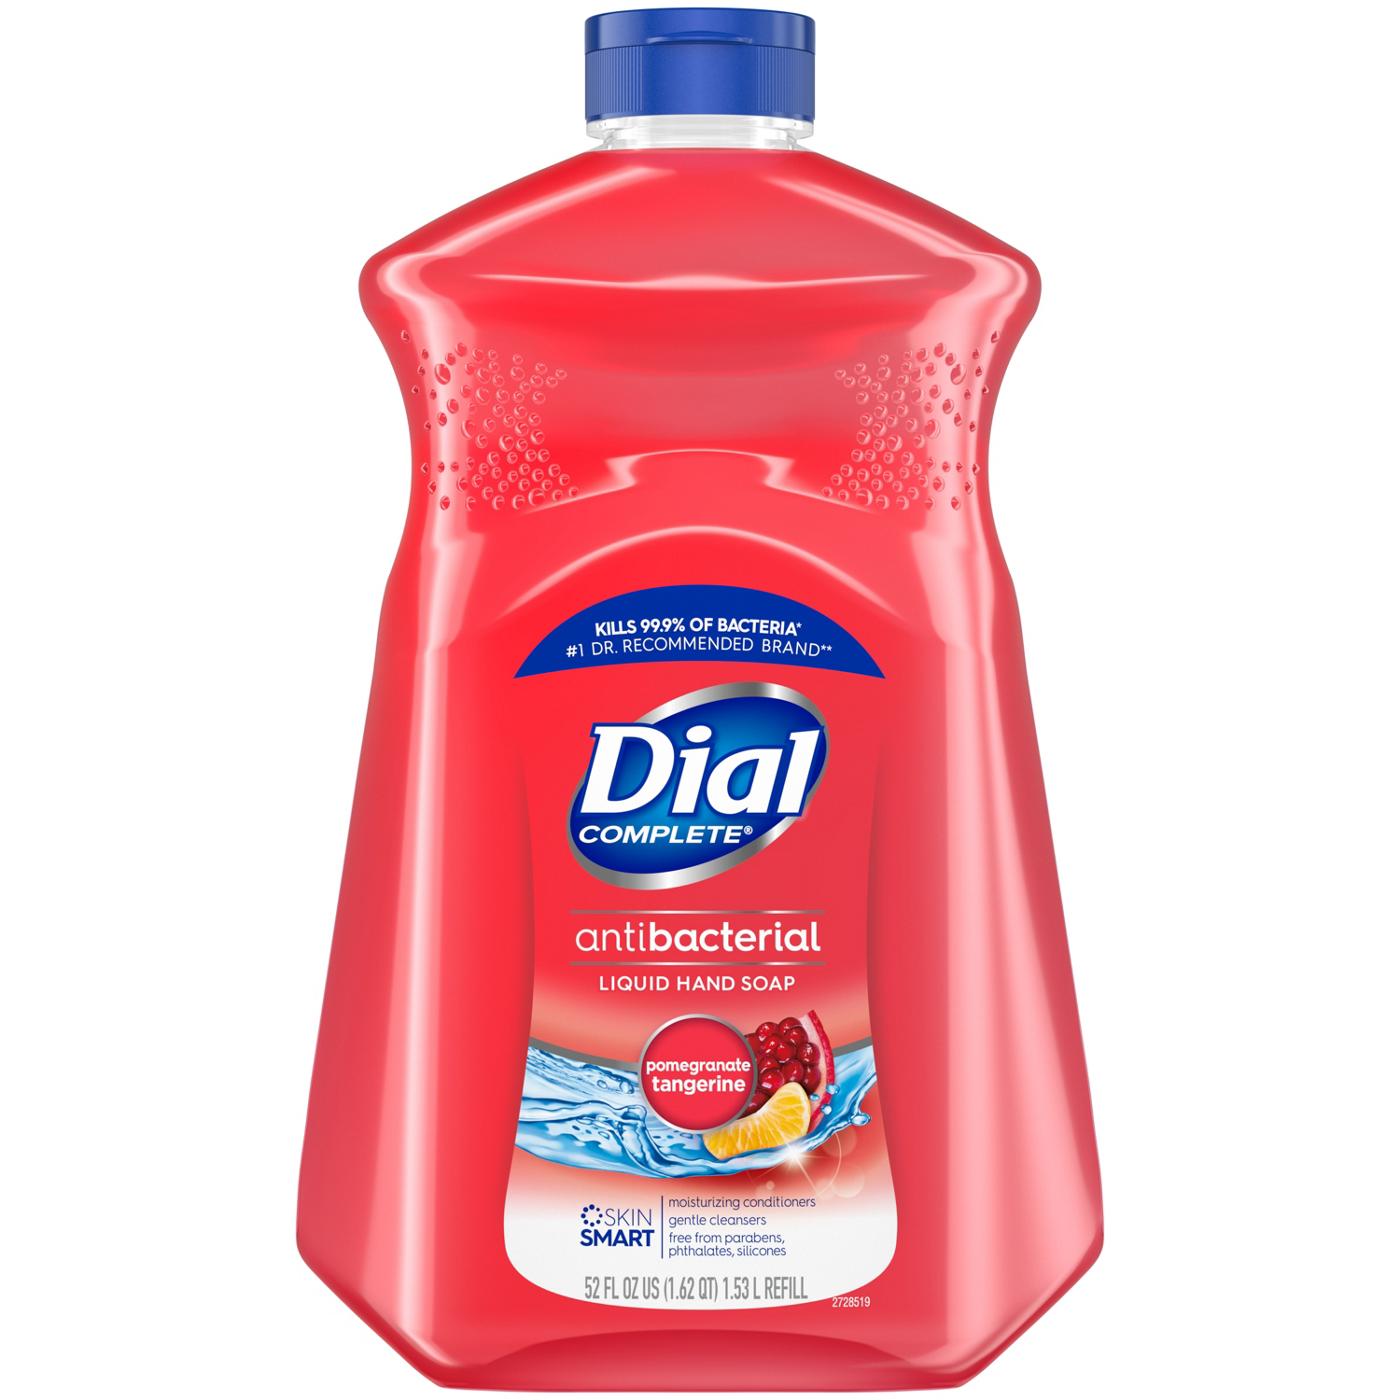 Dial Complete Antibacterial Liquid Hand Soap Refill - Pomegranate Tangerine; image 1 of 2